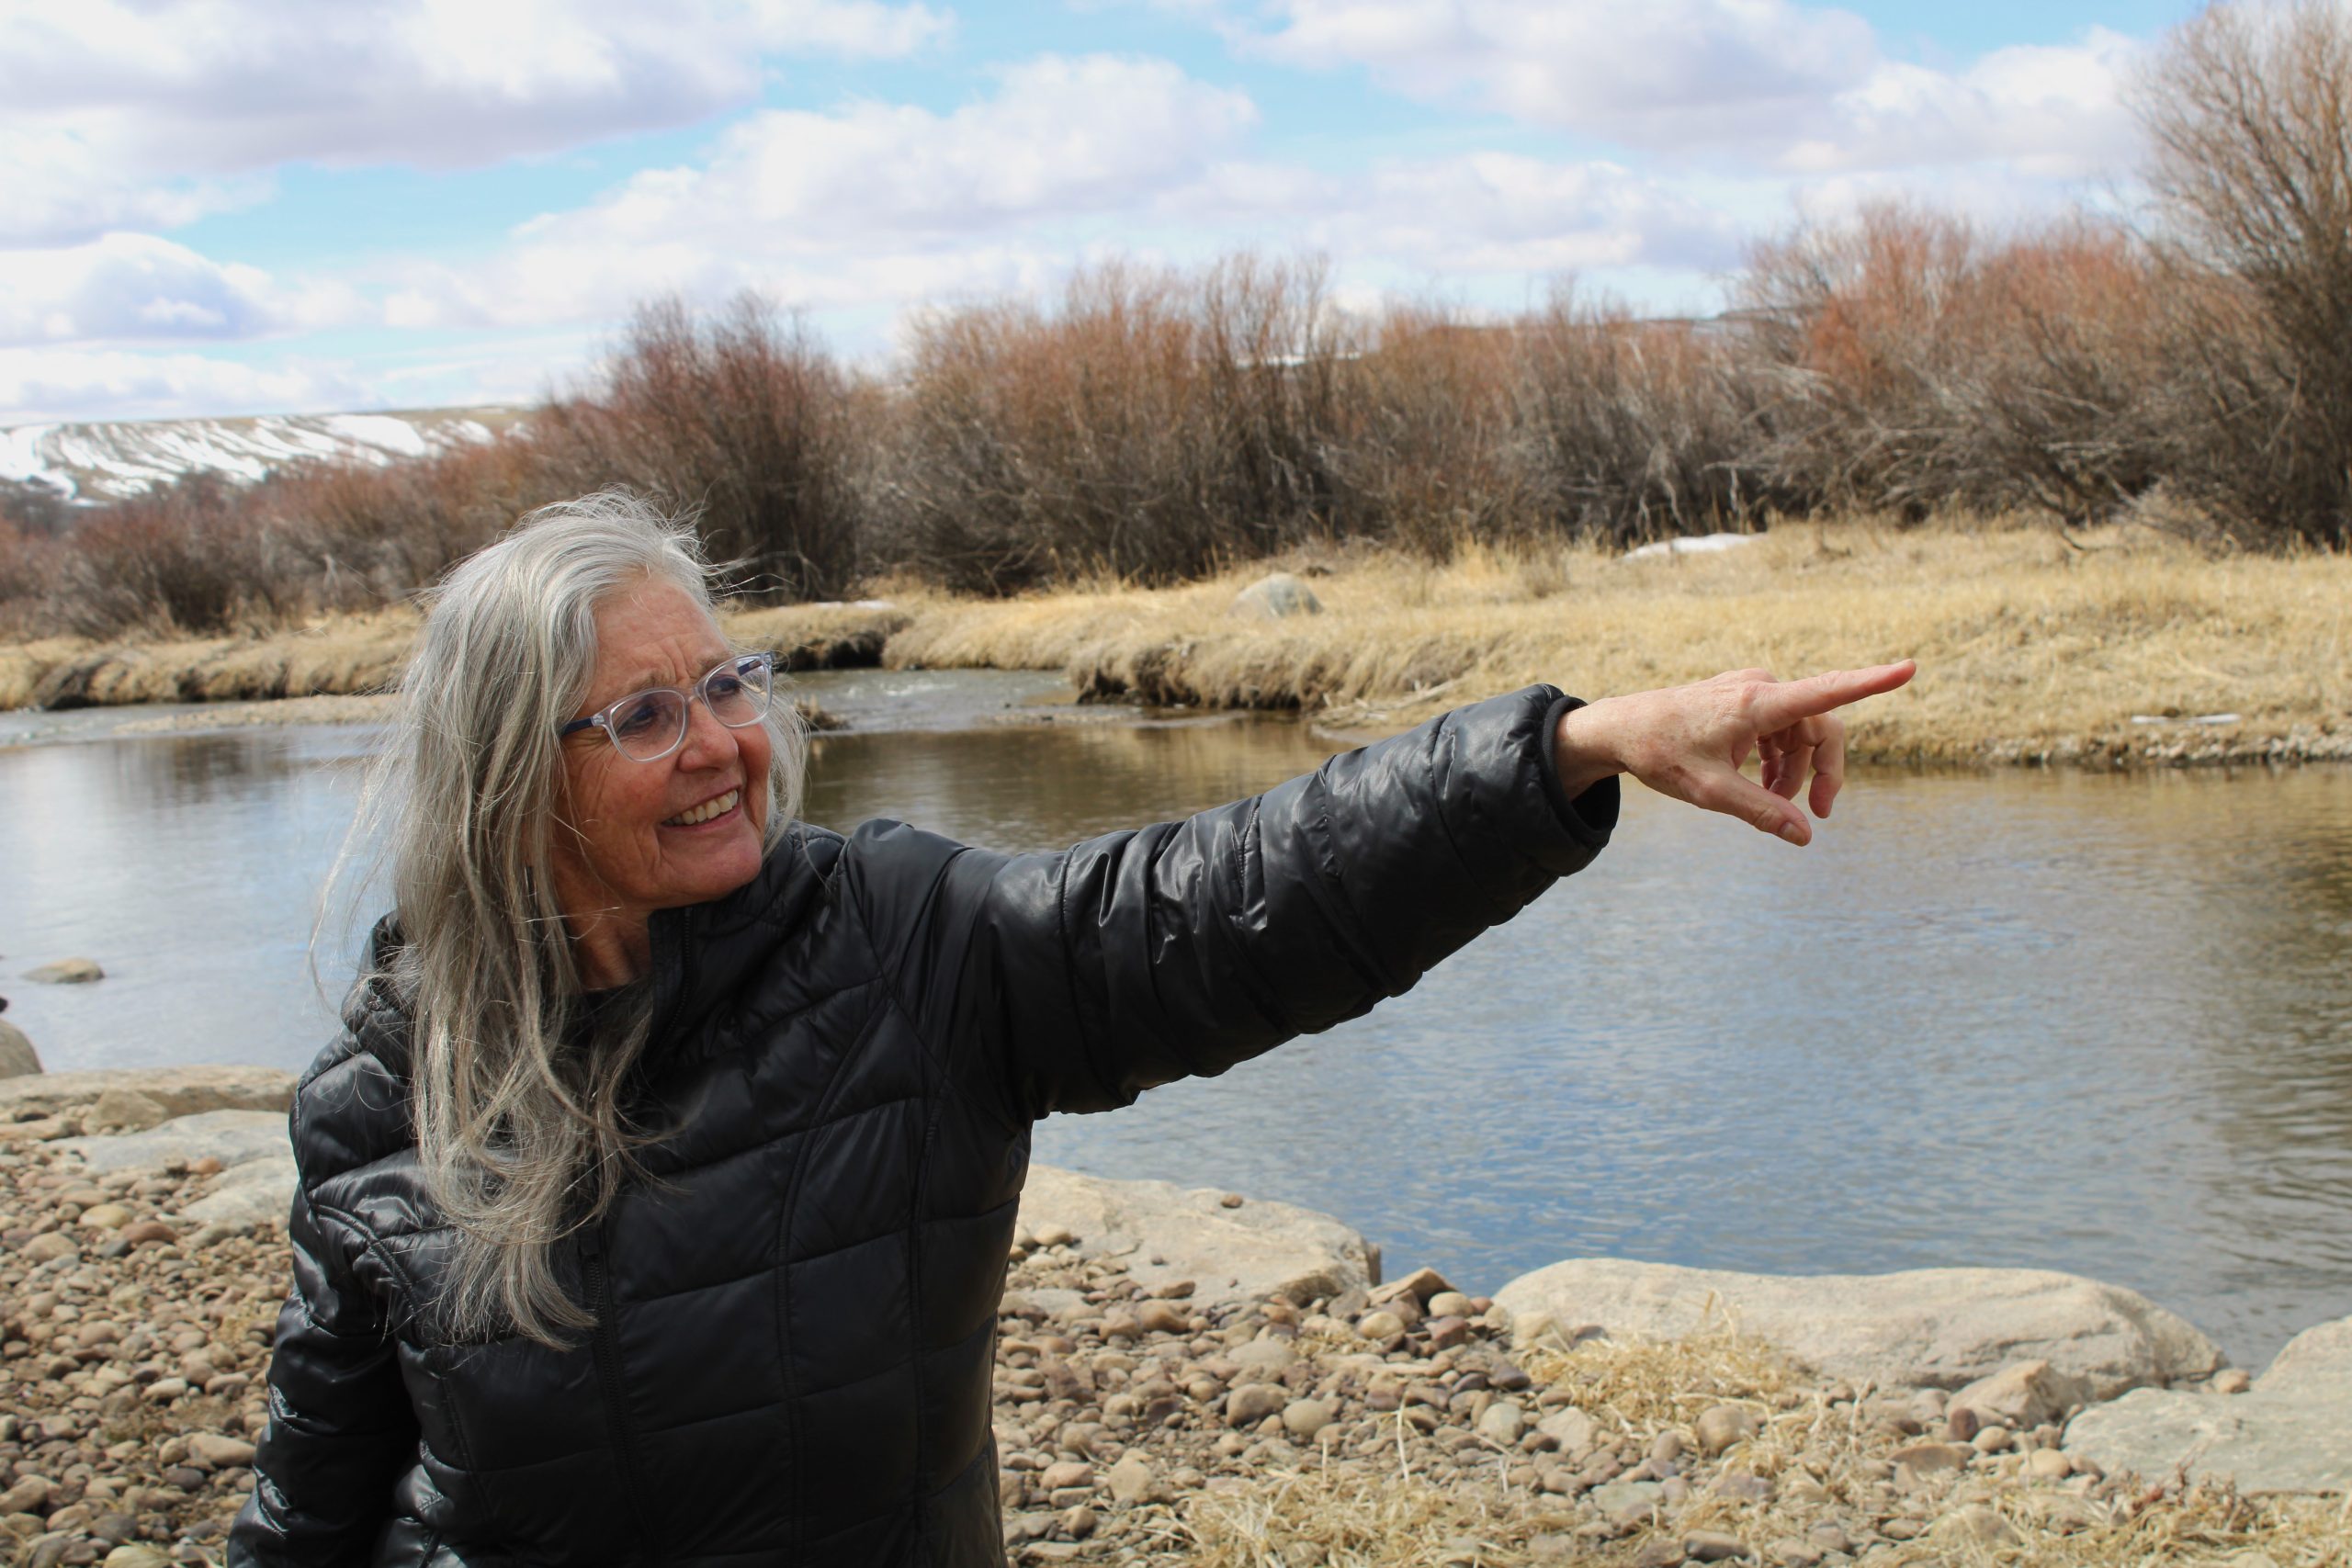 Using less of the Colorado River takes a willing farmer and $45 million in federal funds